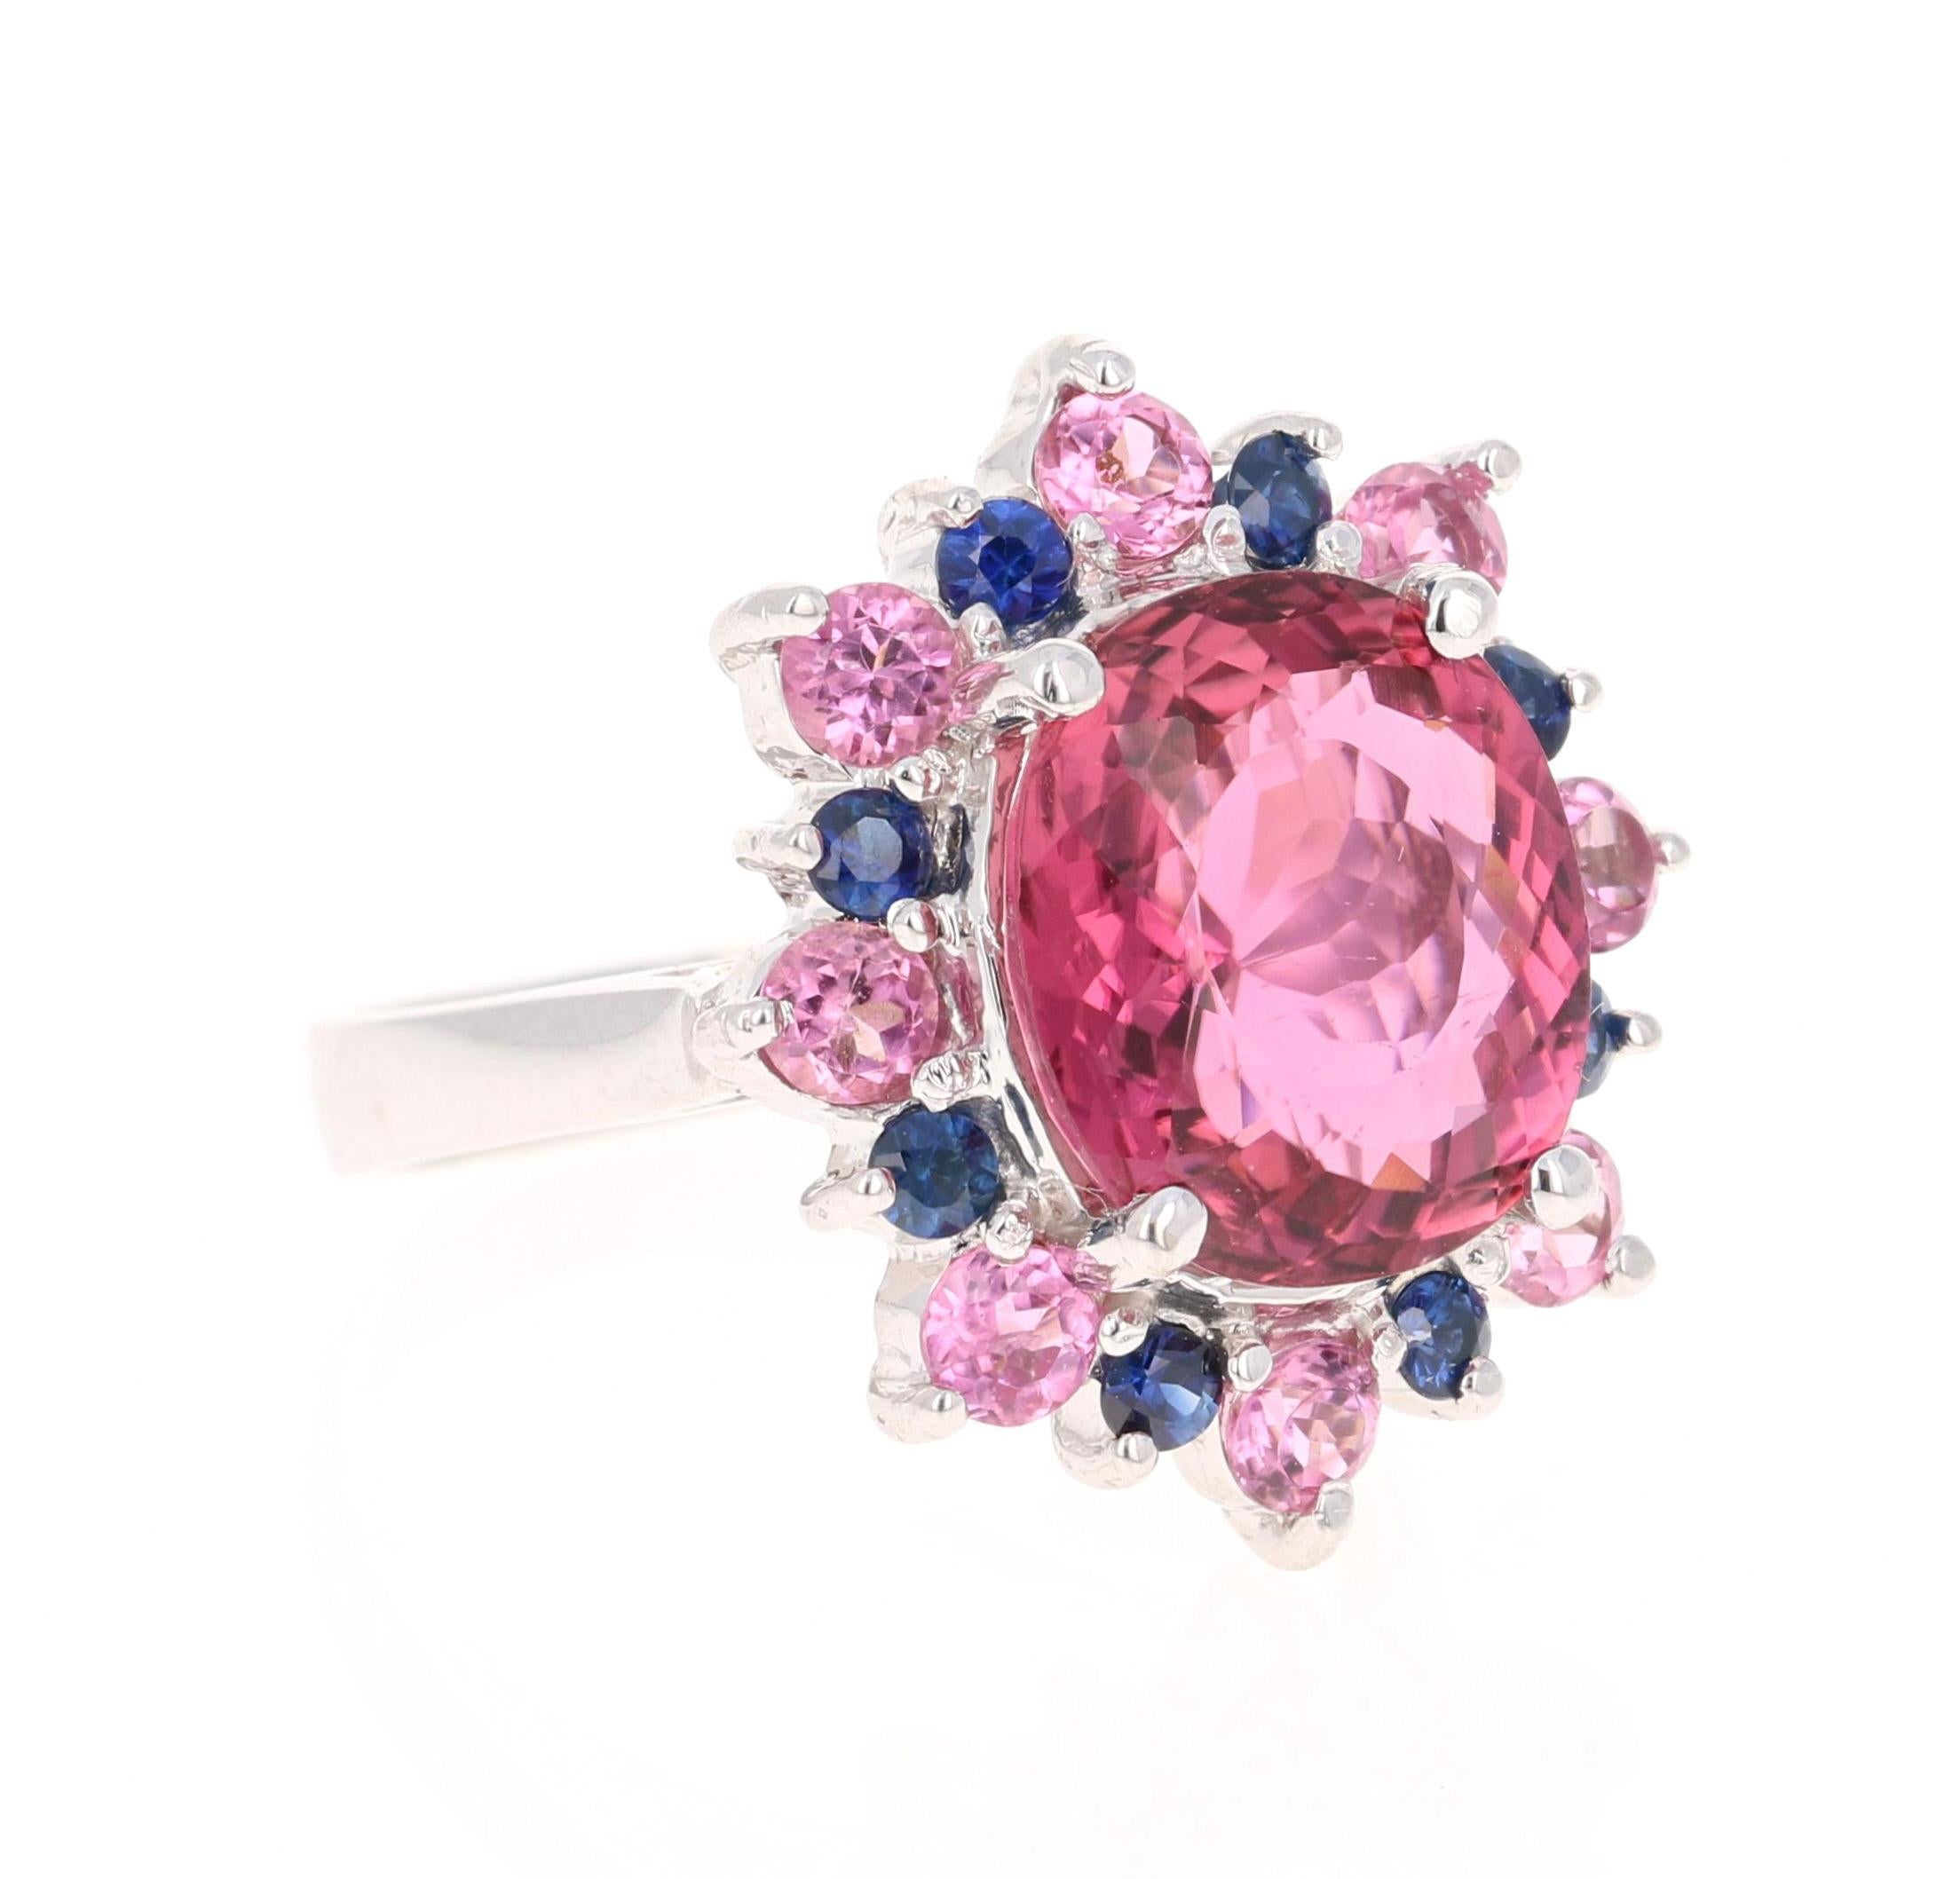 Stunning and uniquely designed 7.82 Carat Pink Tourmaline and Diamond Yellow Gold Cocktail Ring! 

This ring has a 4.83 Carat Oval Cut Pink Tourmaline and is surrounded by 8 Round Cut Pink Tourmalines that weigh 0.86 Carats along with 8 Blue